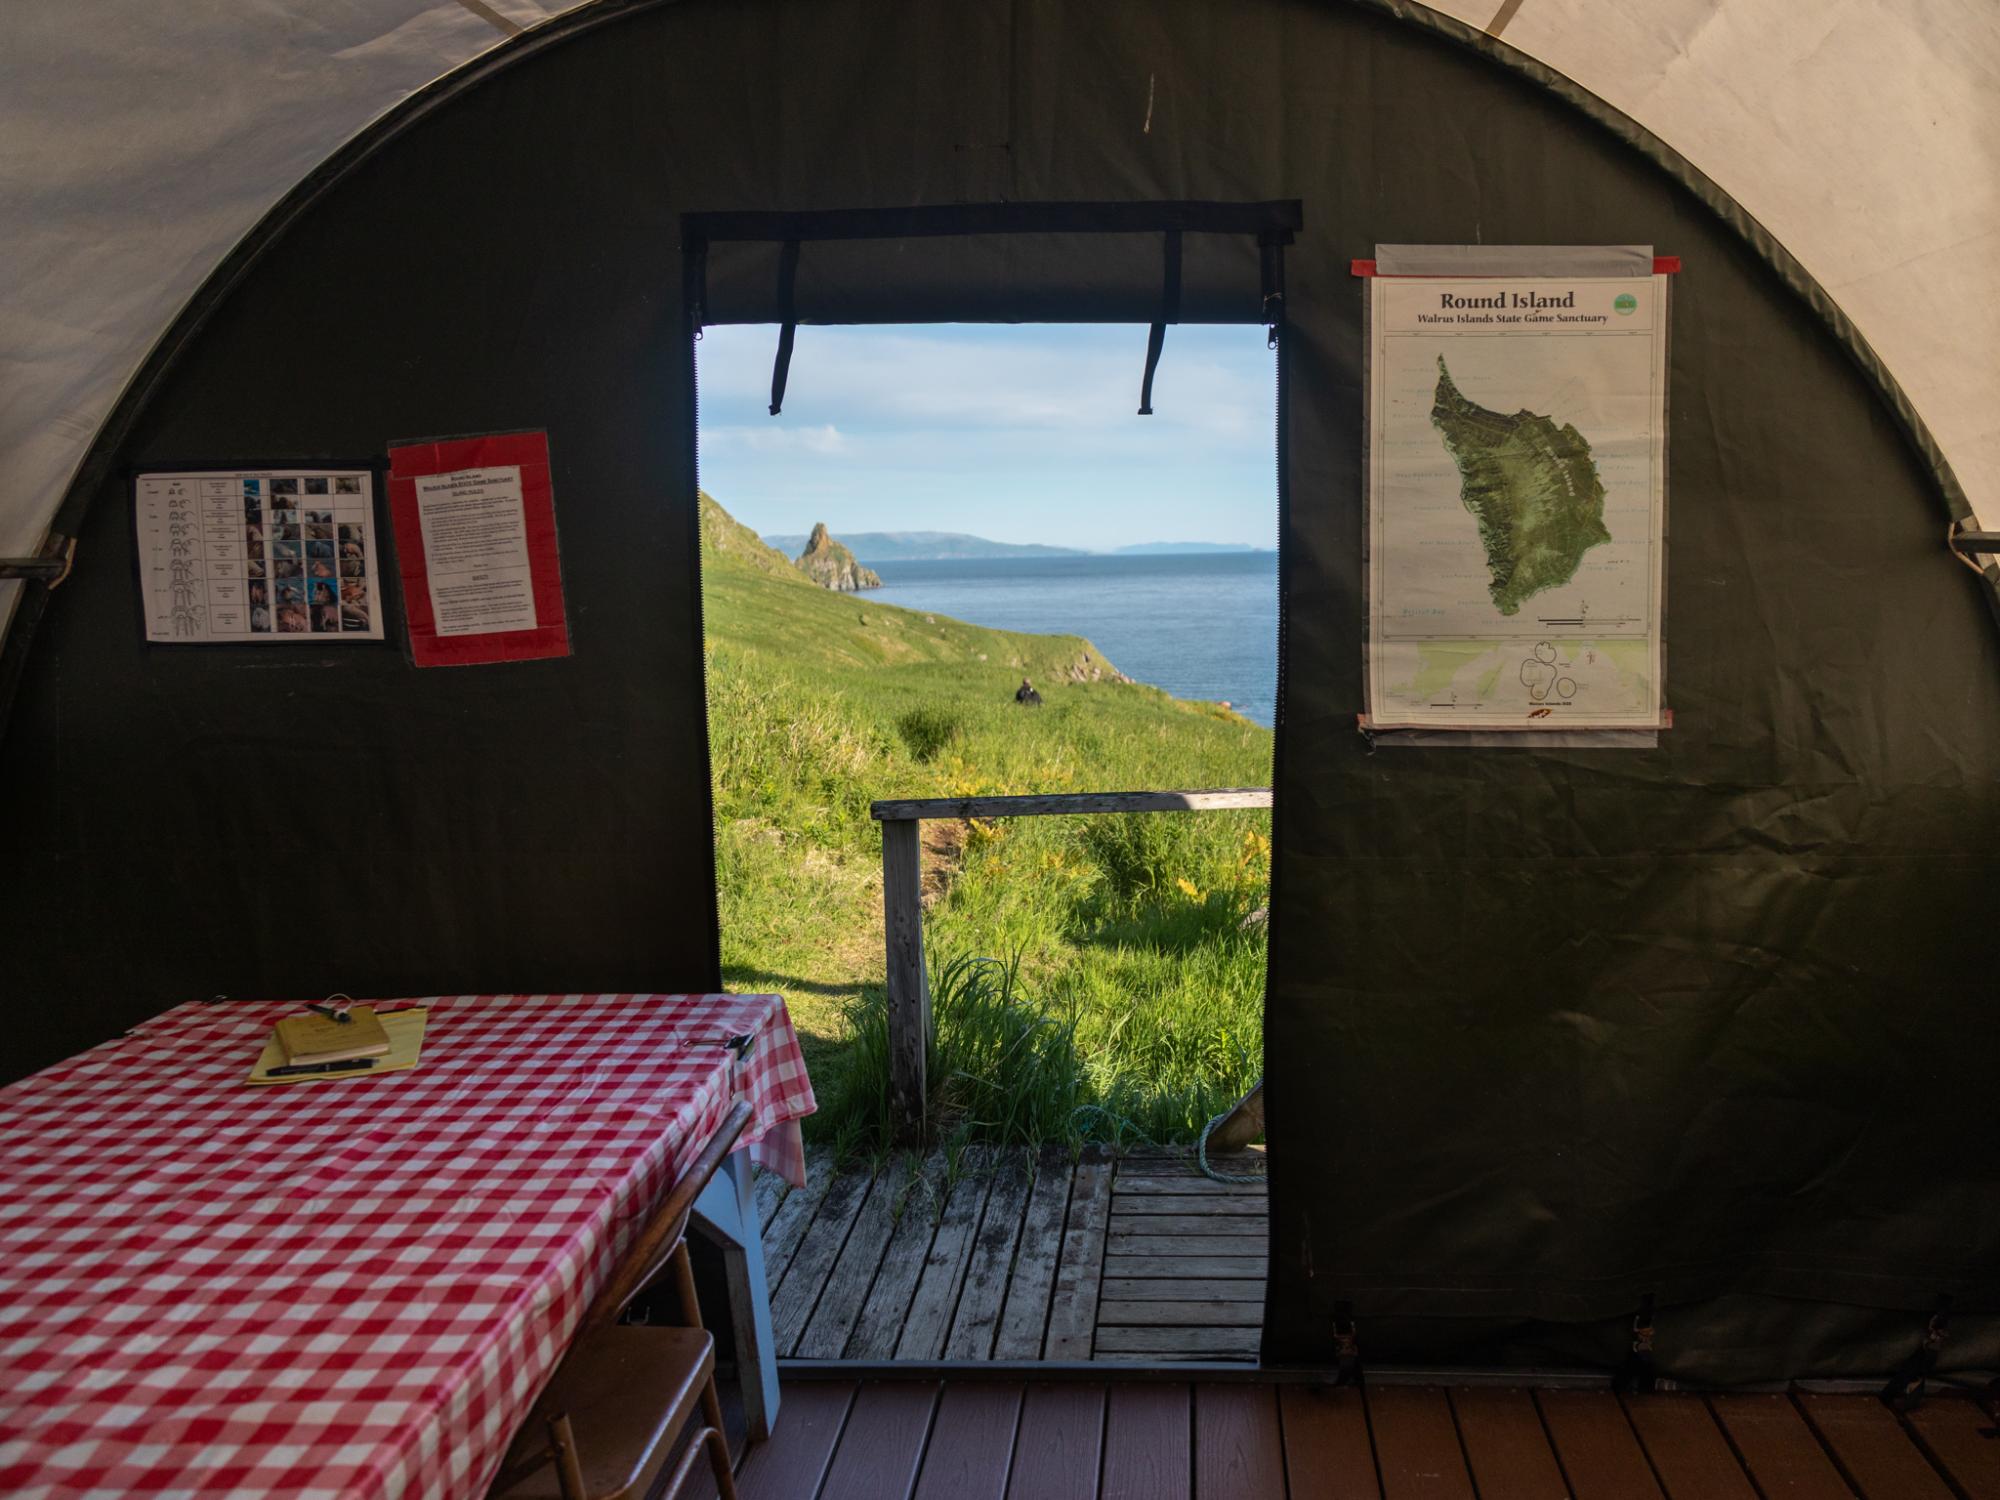 The cook tent in the visitor campground on Round Island. While campers are expected to be fully self-sufficient in most respects, this weatherproof tent provides a communal space in which to prep food, eat, and socialize.